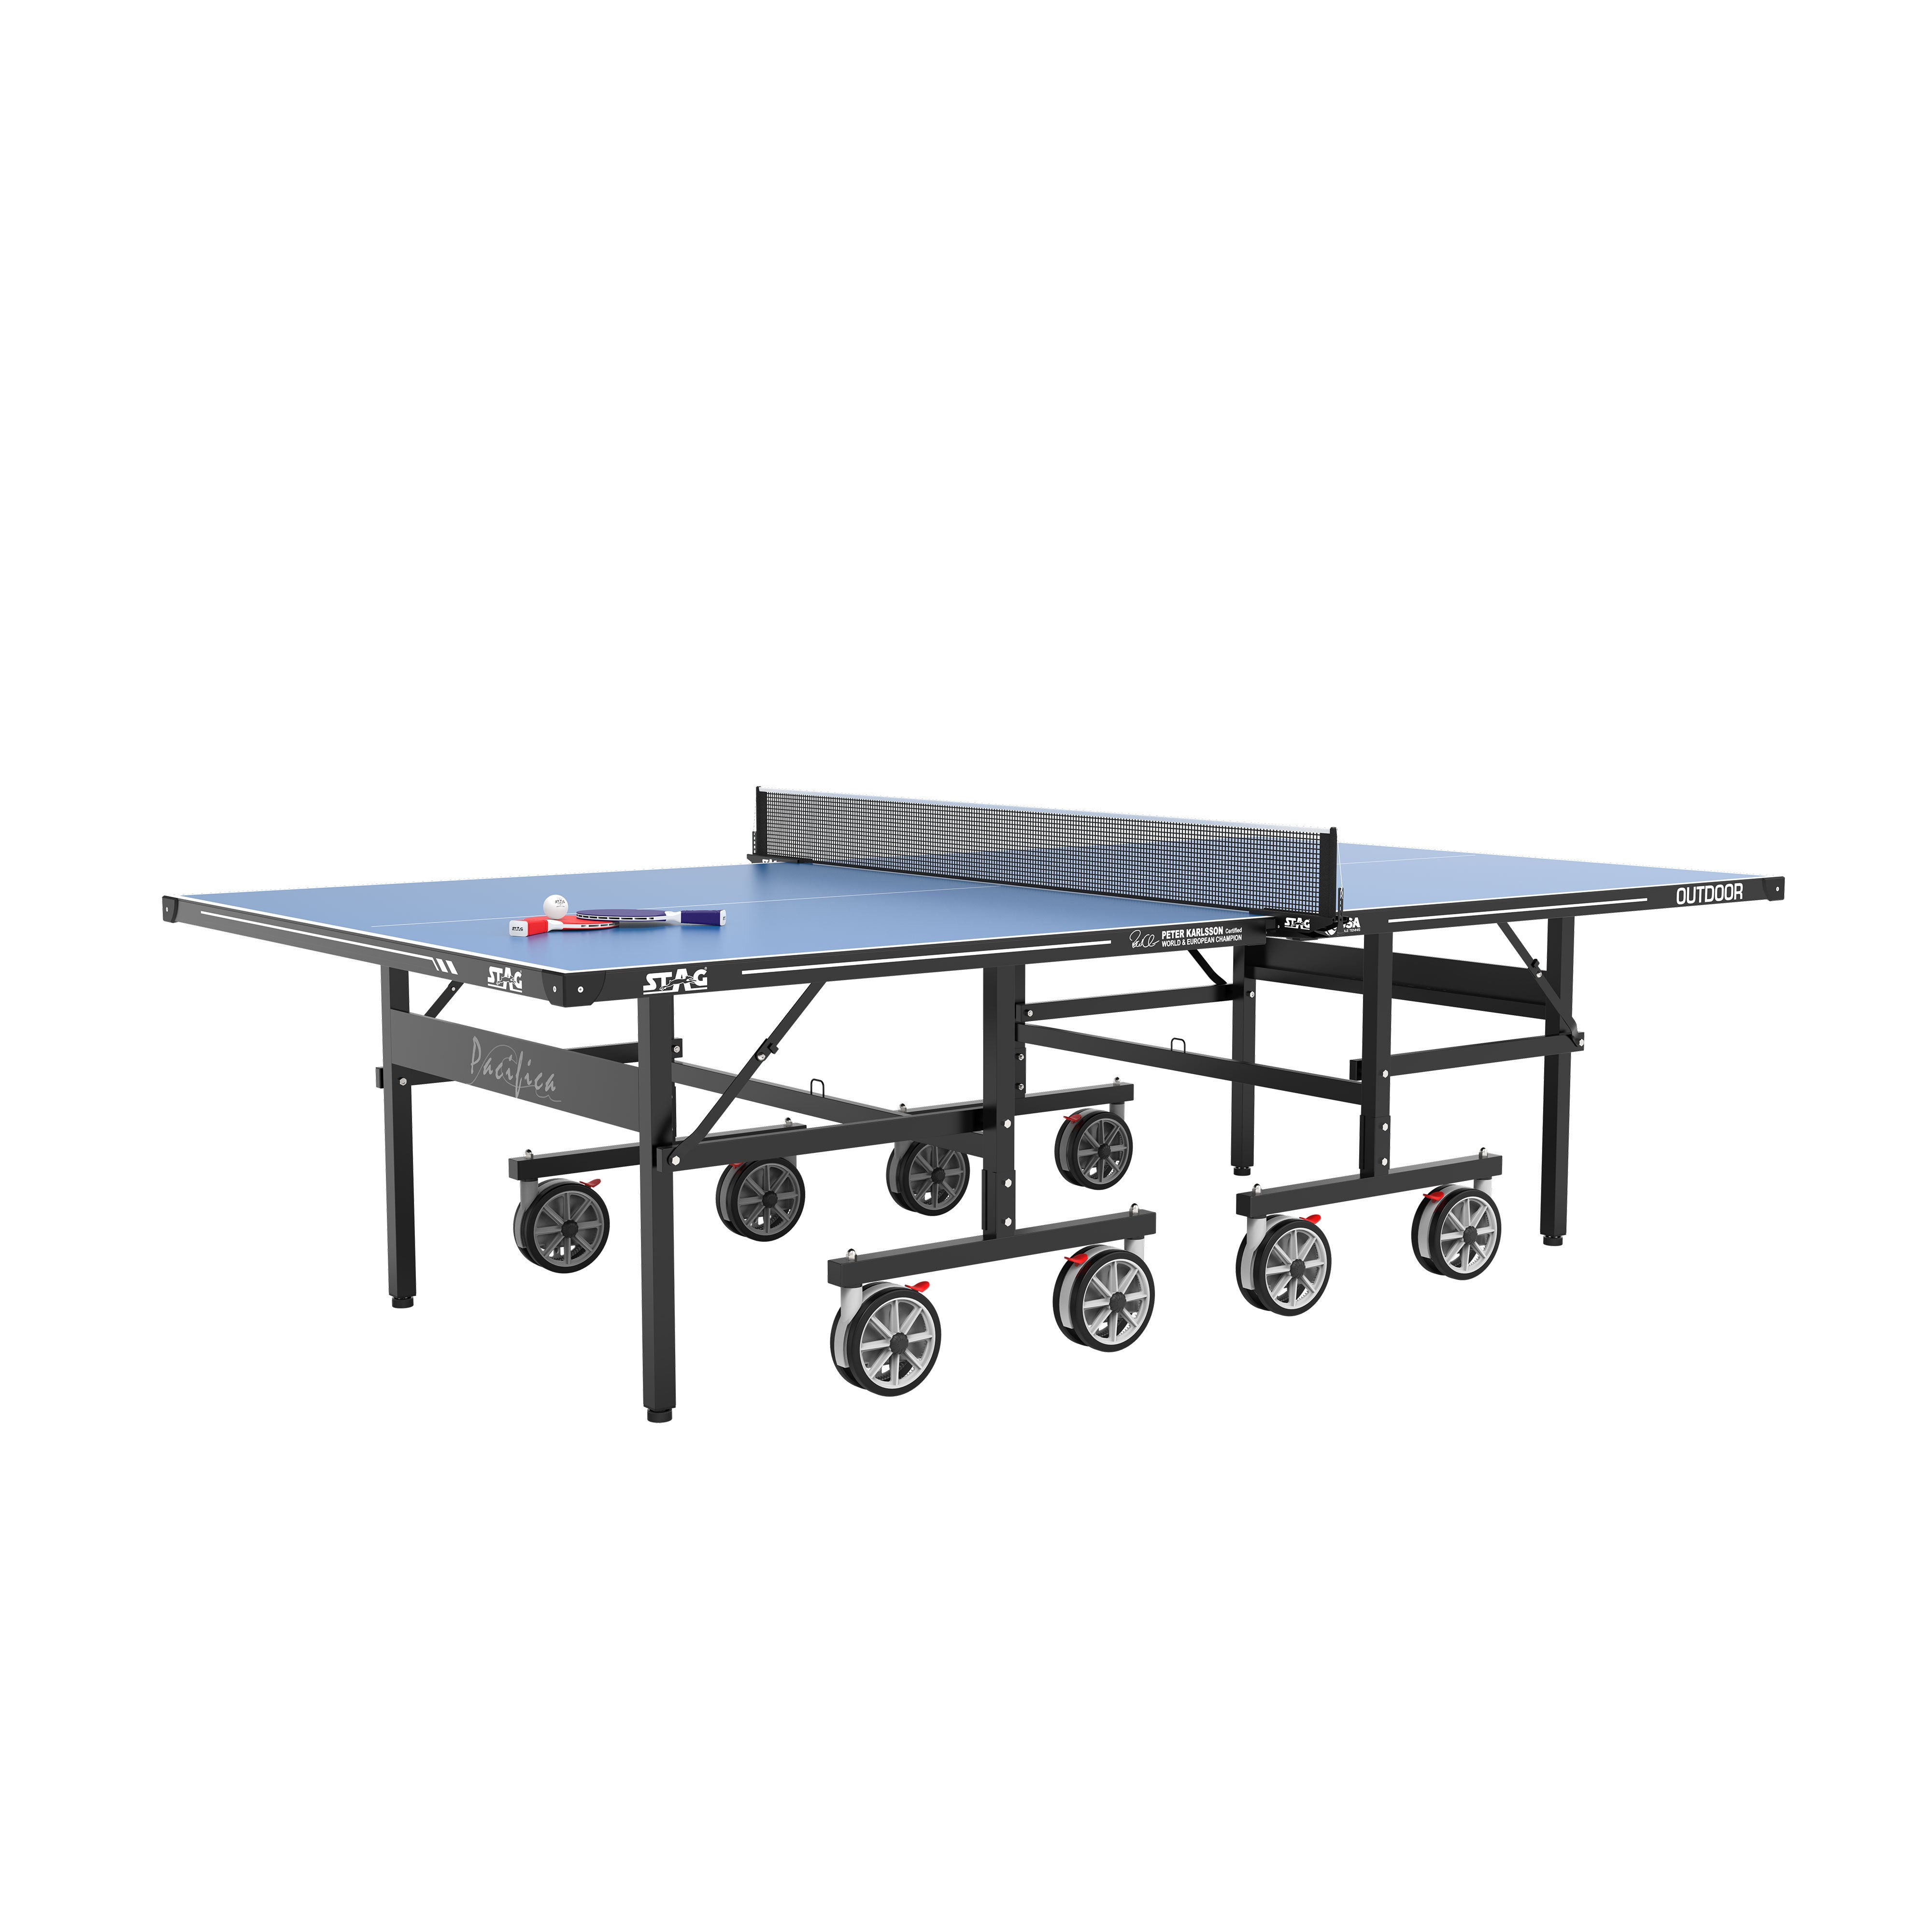 Pacifica Blue Outdoor Table Tennis Table - 2-Player Bundle